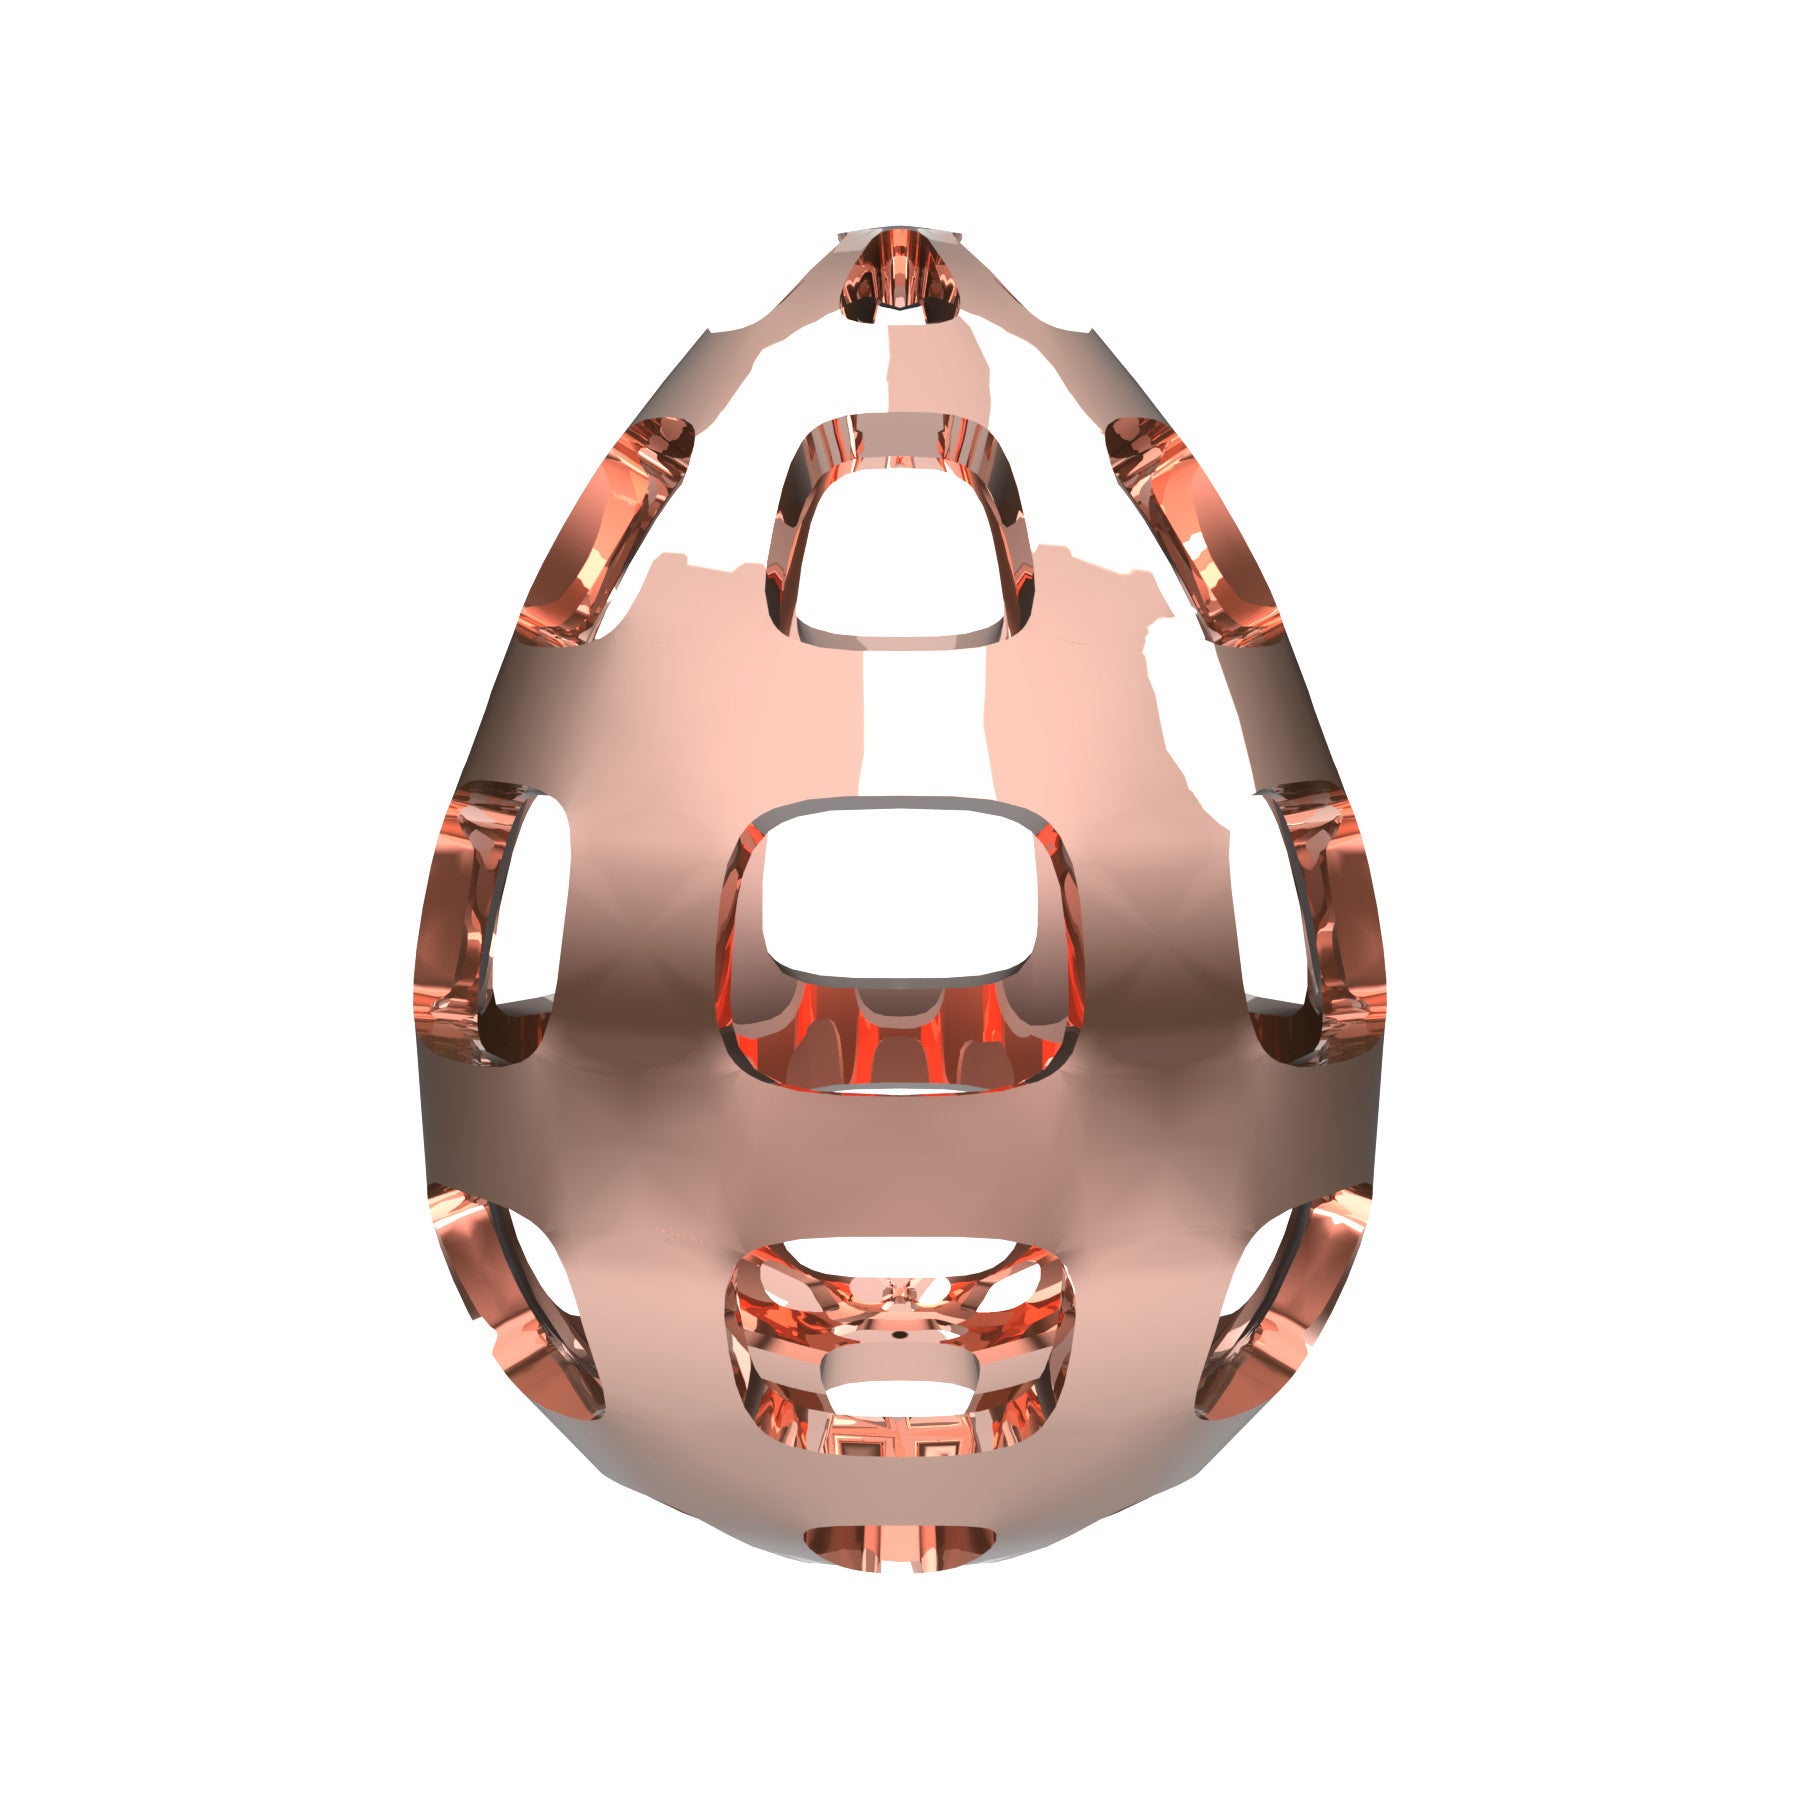 egg bomb pendant, 18 K pink gold, weight about 16,8 g (0.59 oz), size 28,5x28,5x29,9 mm